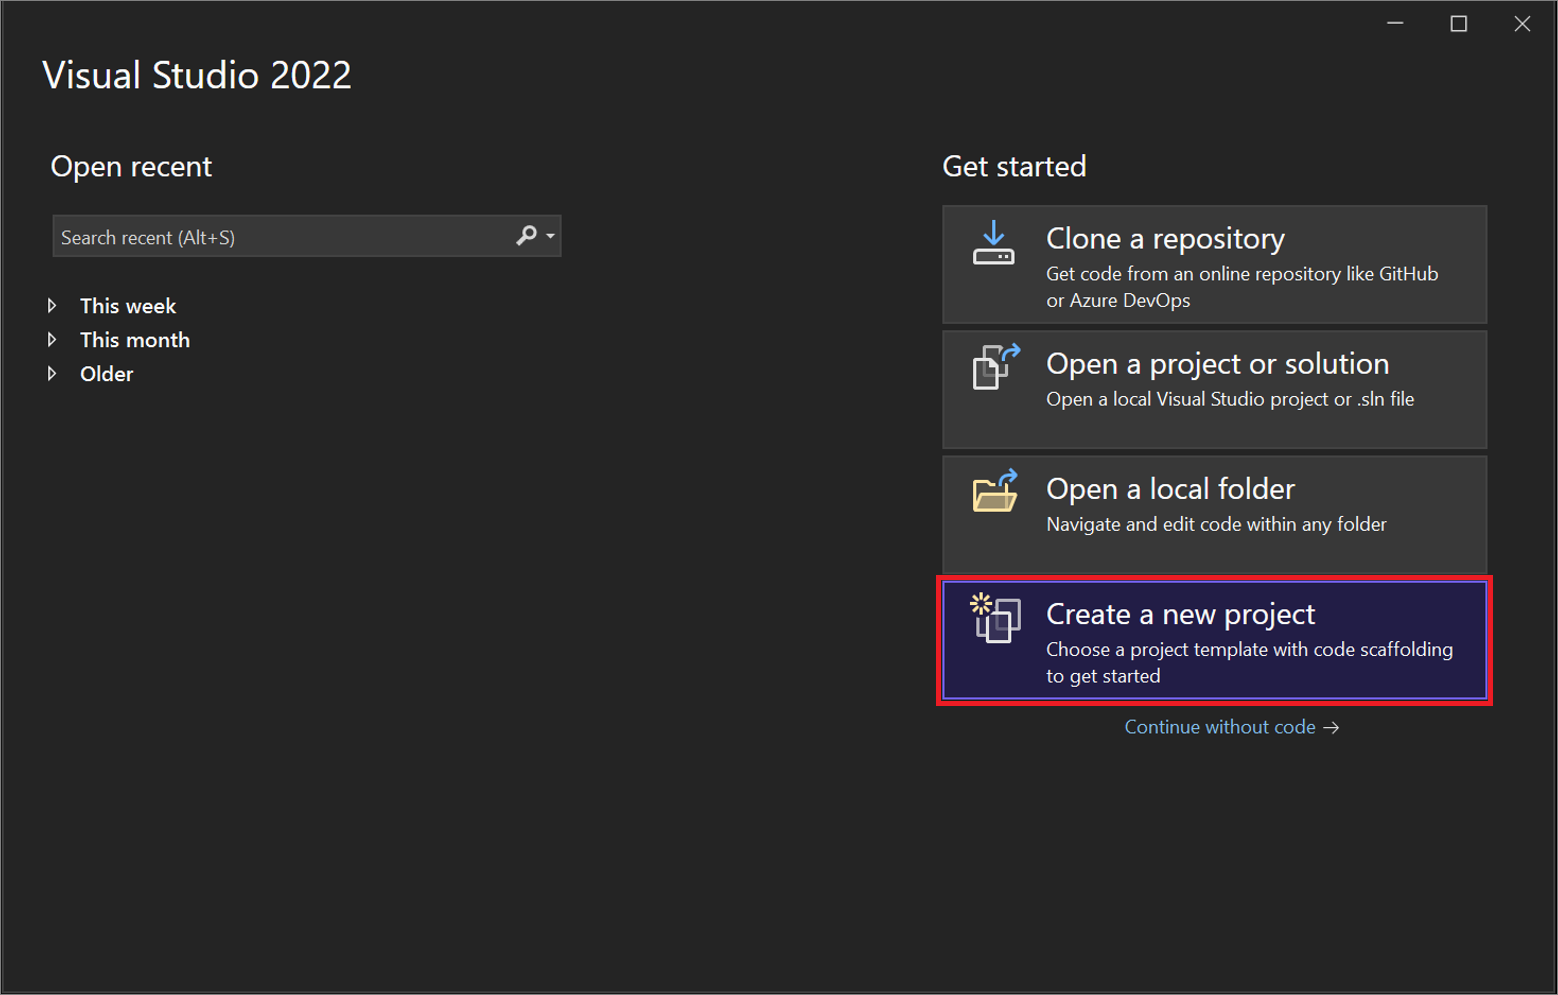 Screenshot of the 'Create a new project' dialog from the start window in Visual Studio 2022.